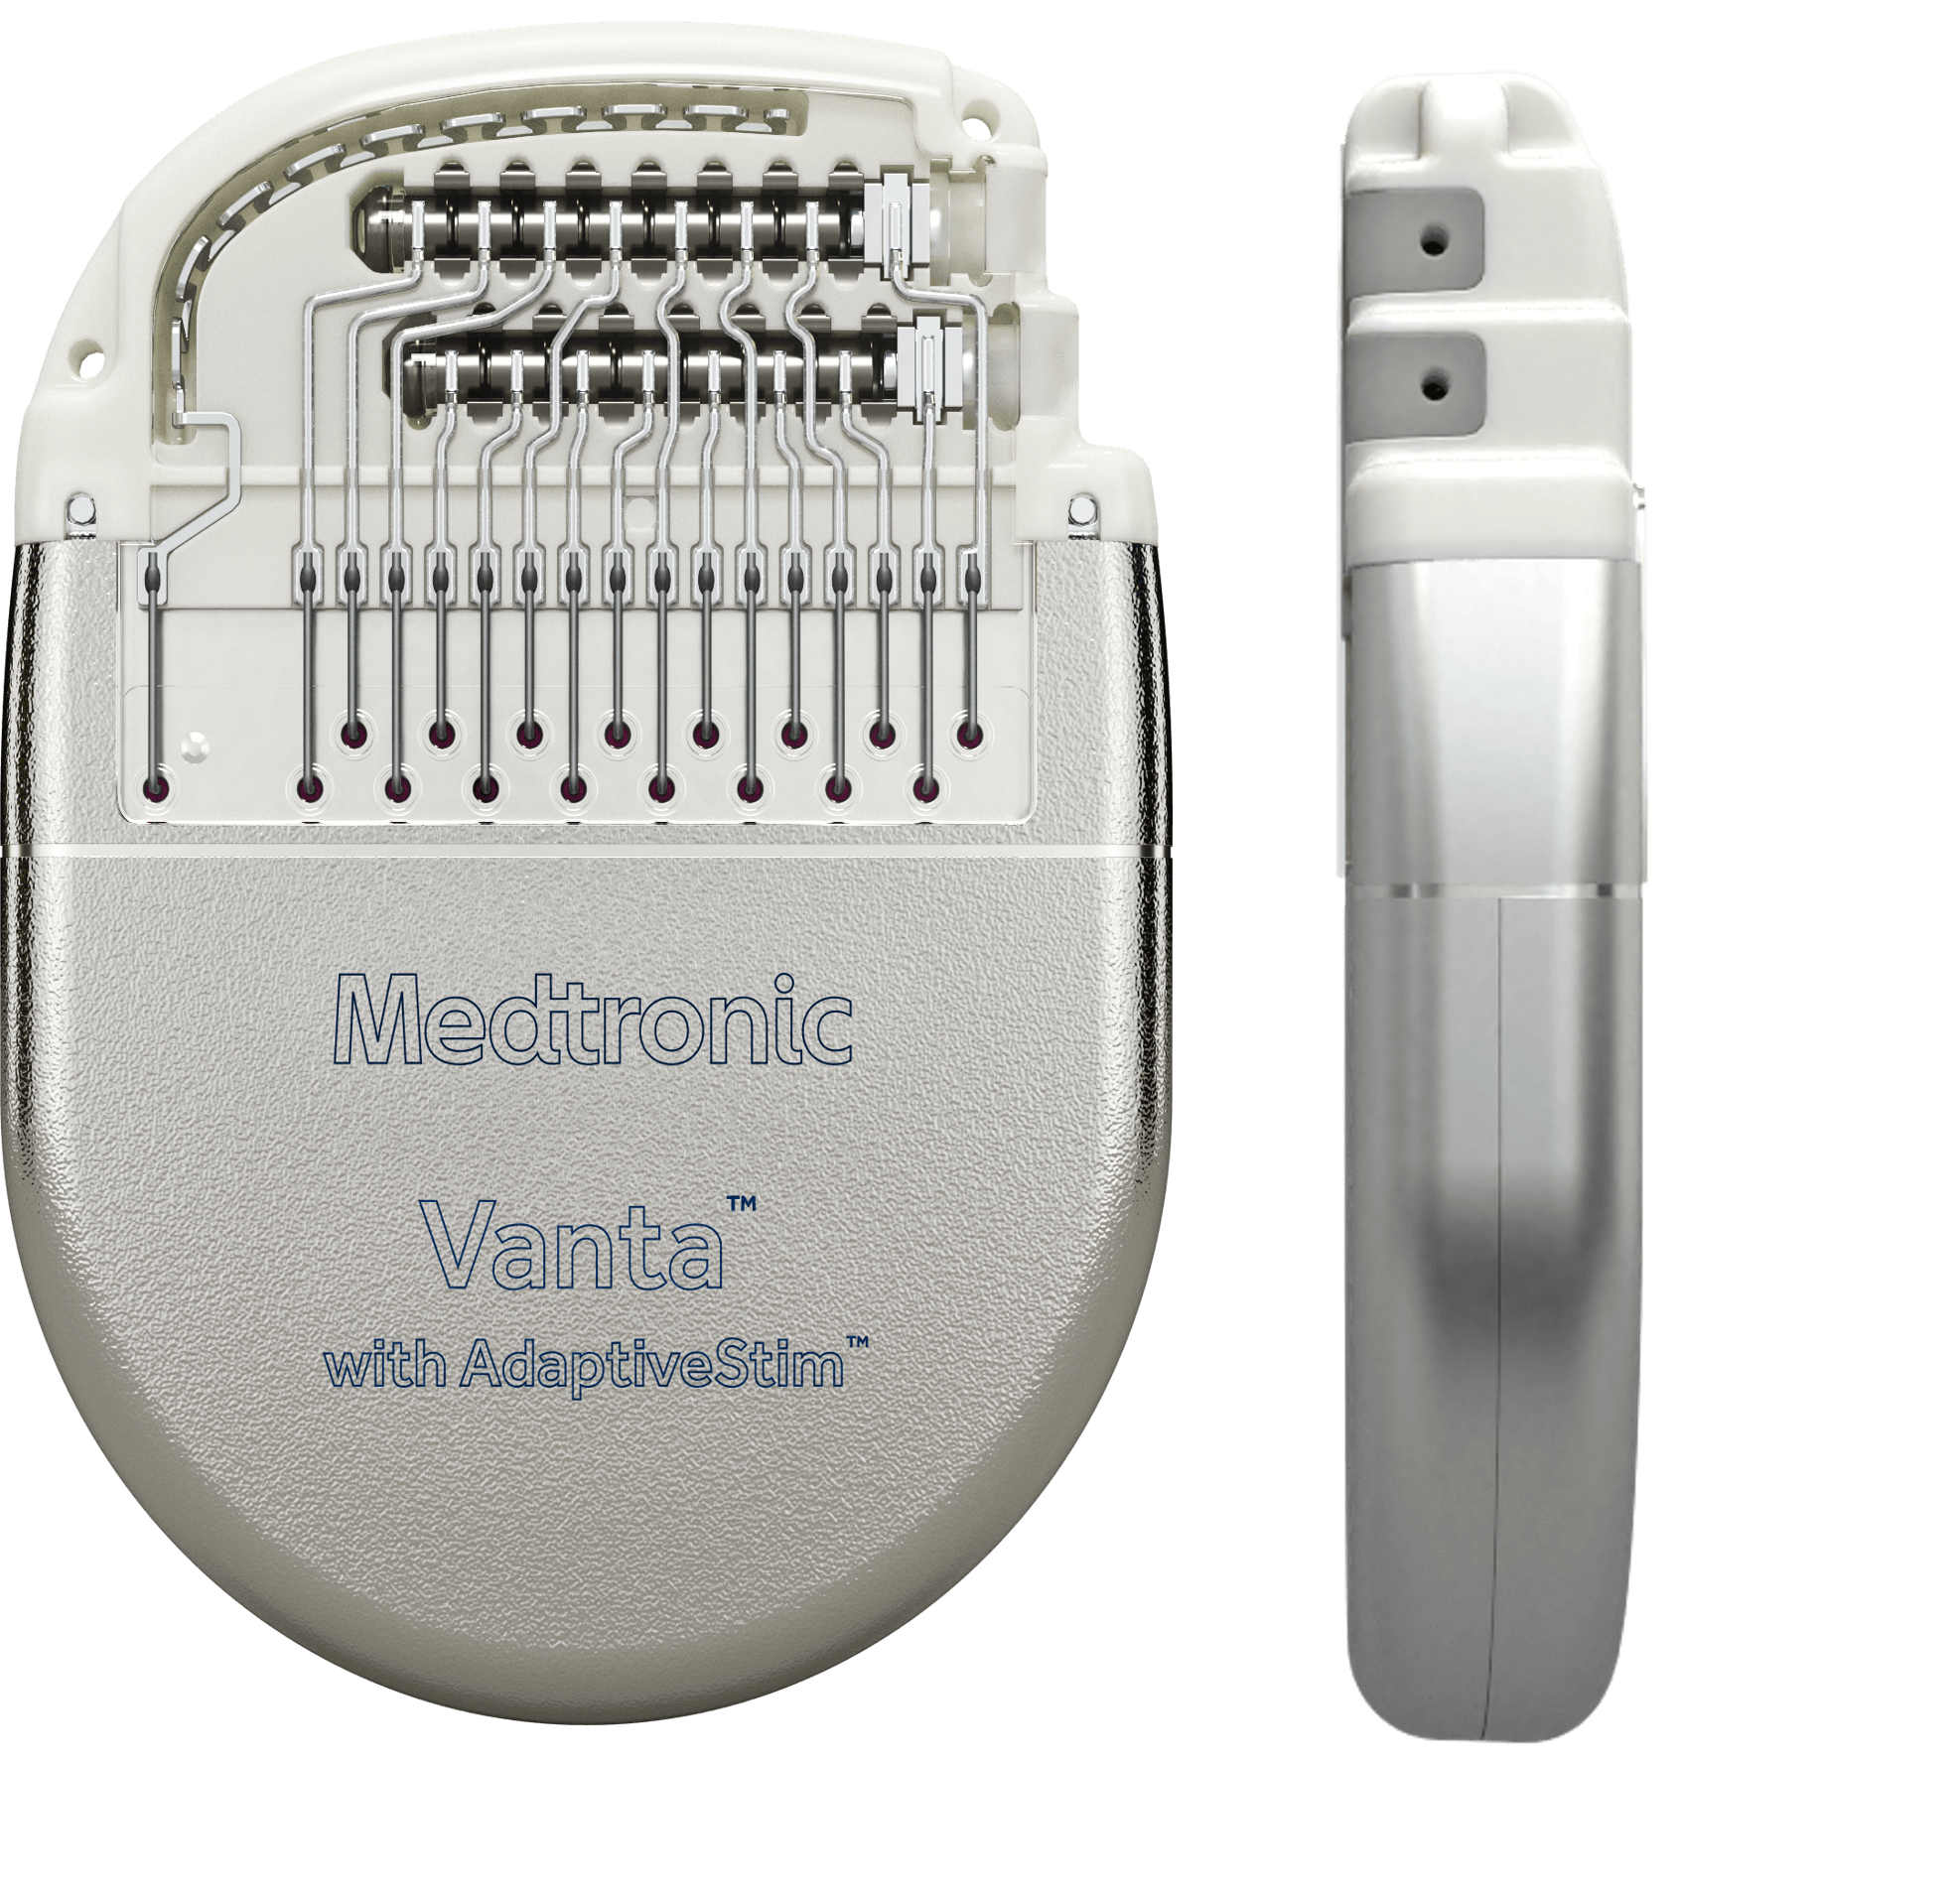 Front & side view of Medtronic Vanta recharge-free spinal cord neurostimulator